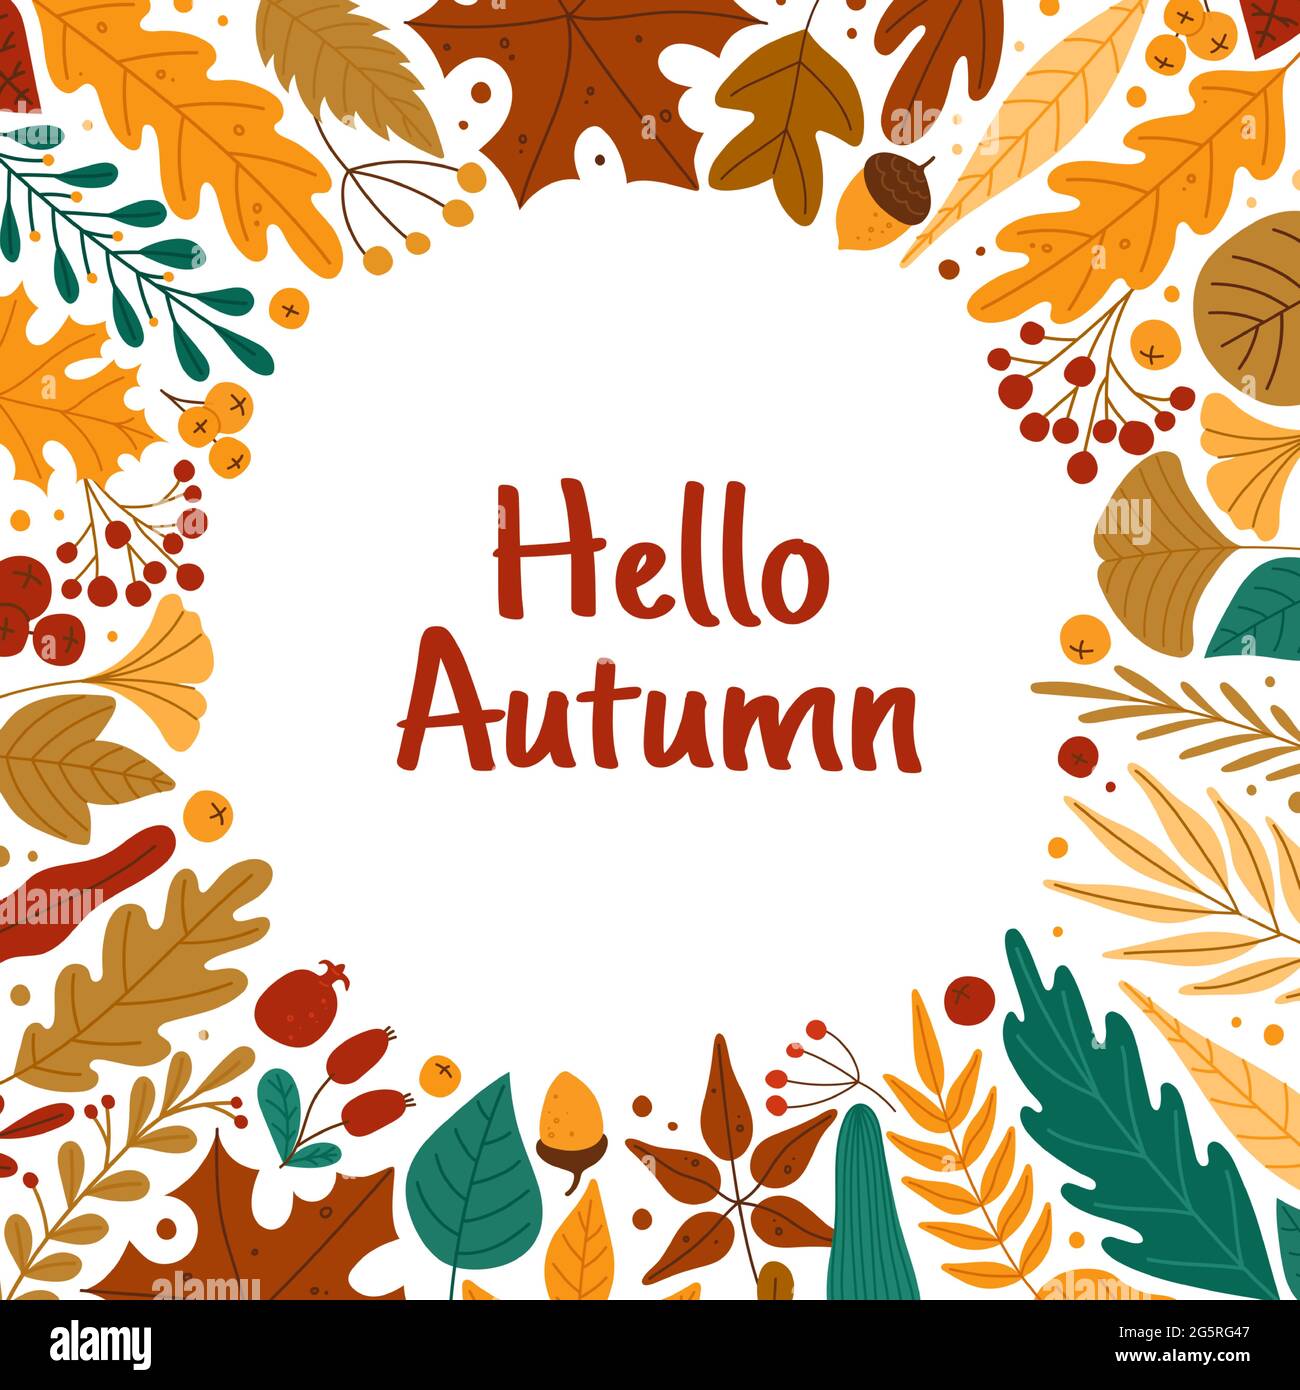 Autumn leaves frame. Hello autumn banner with red or yellow leaves, berries, acorns. Oak, maple fall foliage round border Vector background. Promo poster with colorful plants for adverts Stock Vector